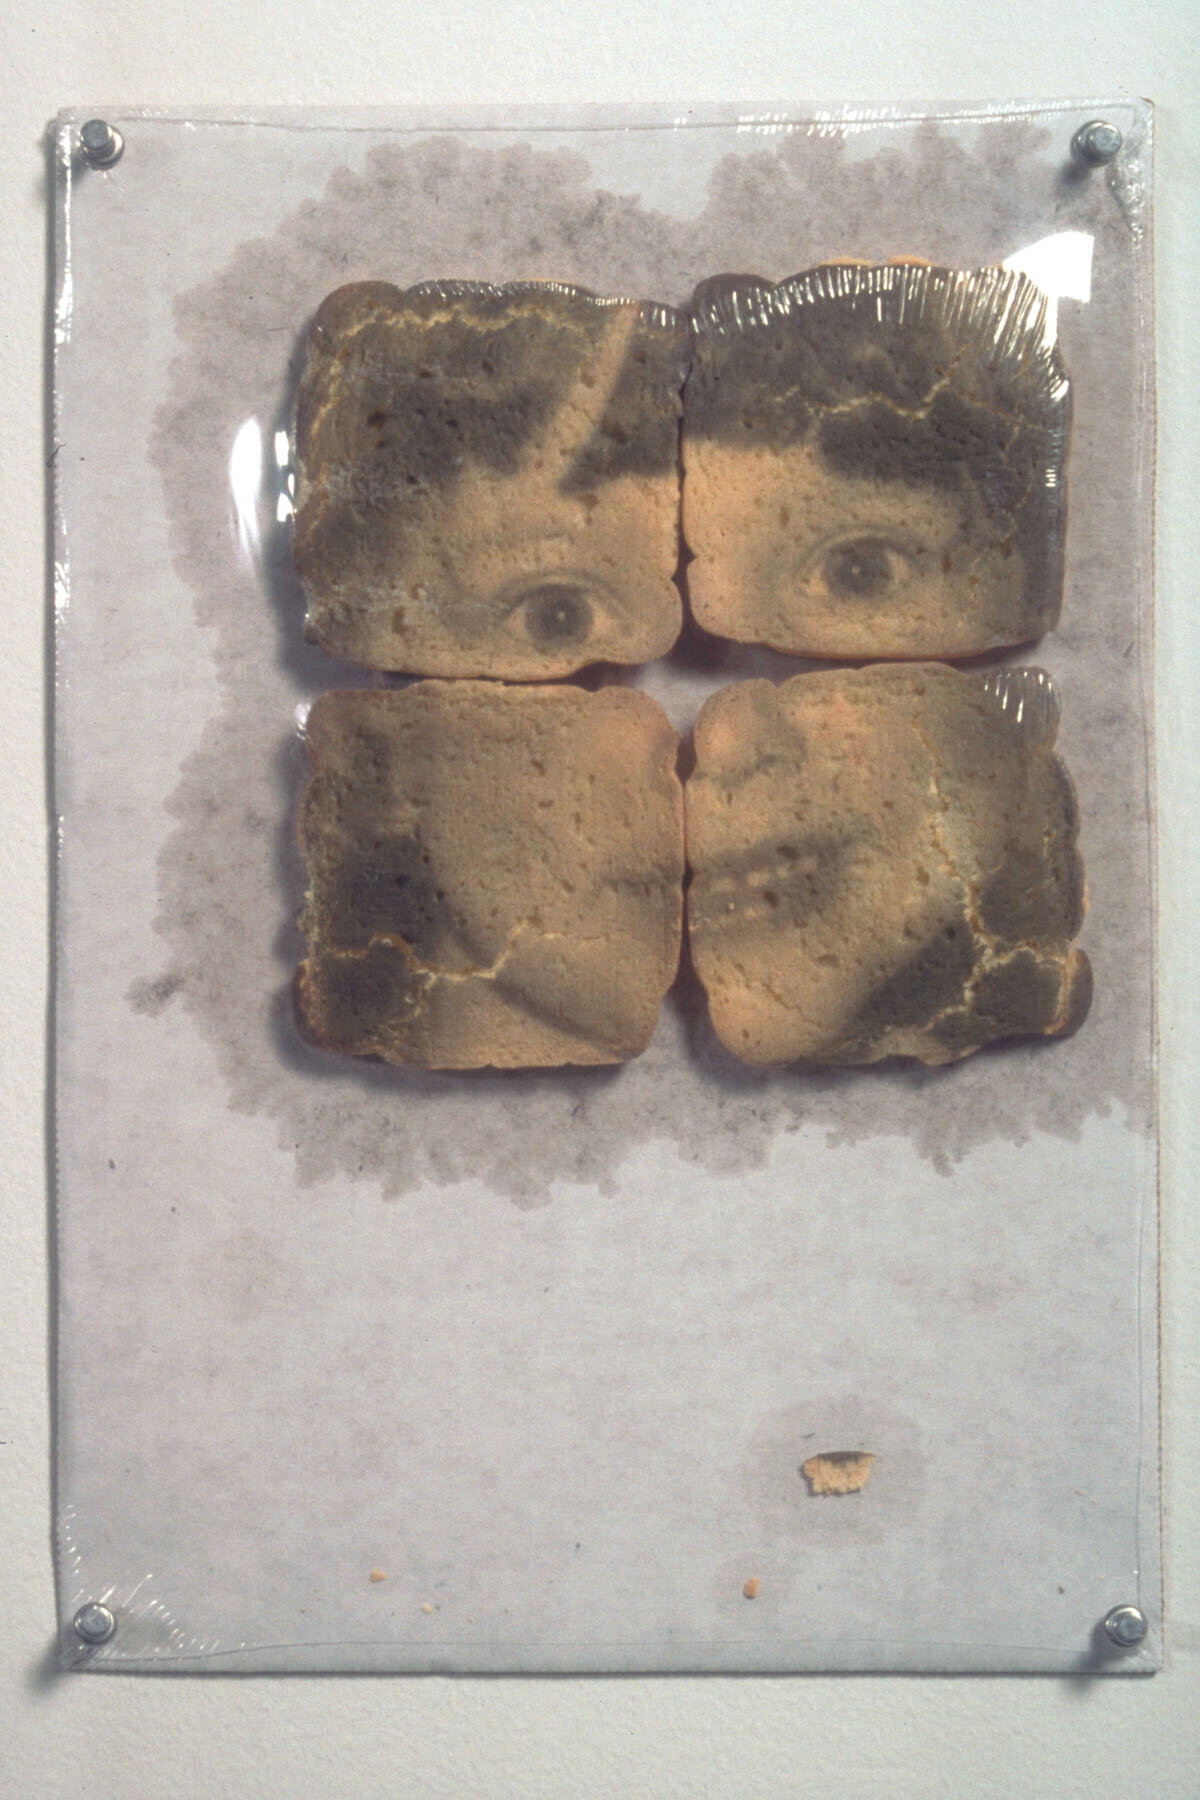   Untitled (cookie portrait) , 1997, black food coloring on cookies, shrink wrap, cardboard, push pins, 15 x 11 inches 